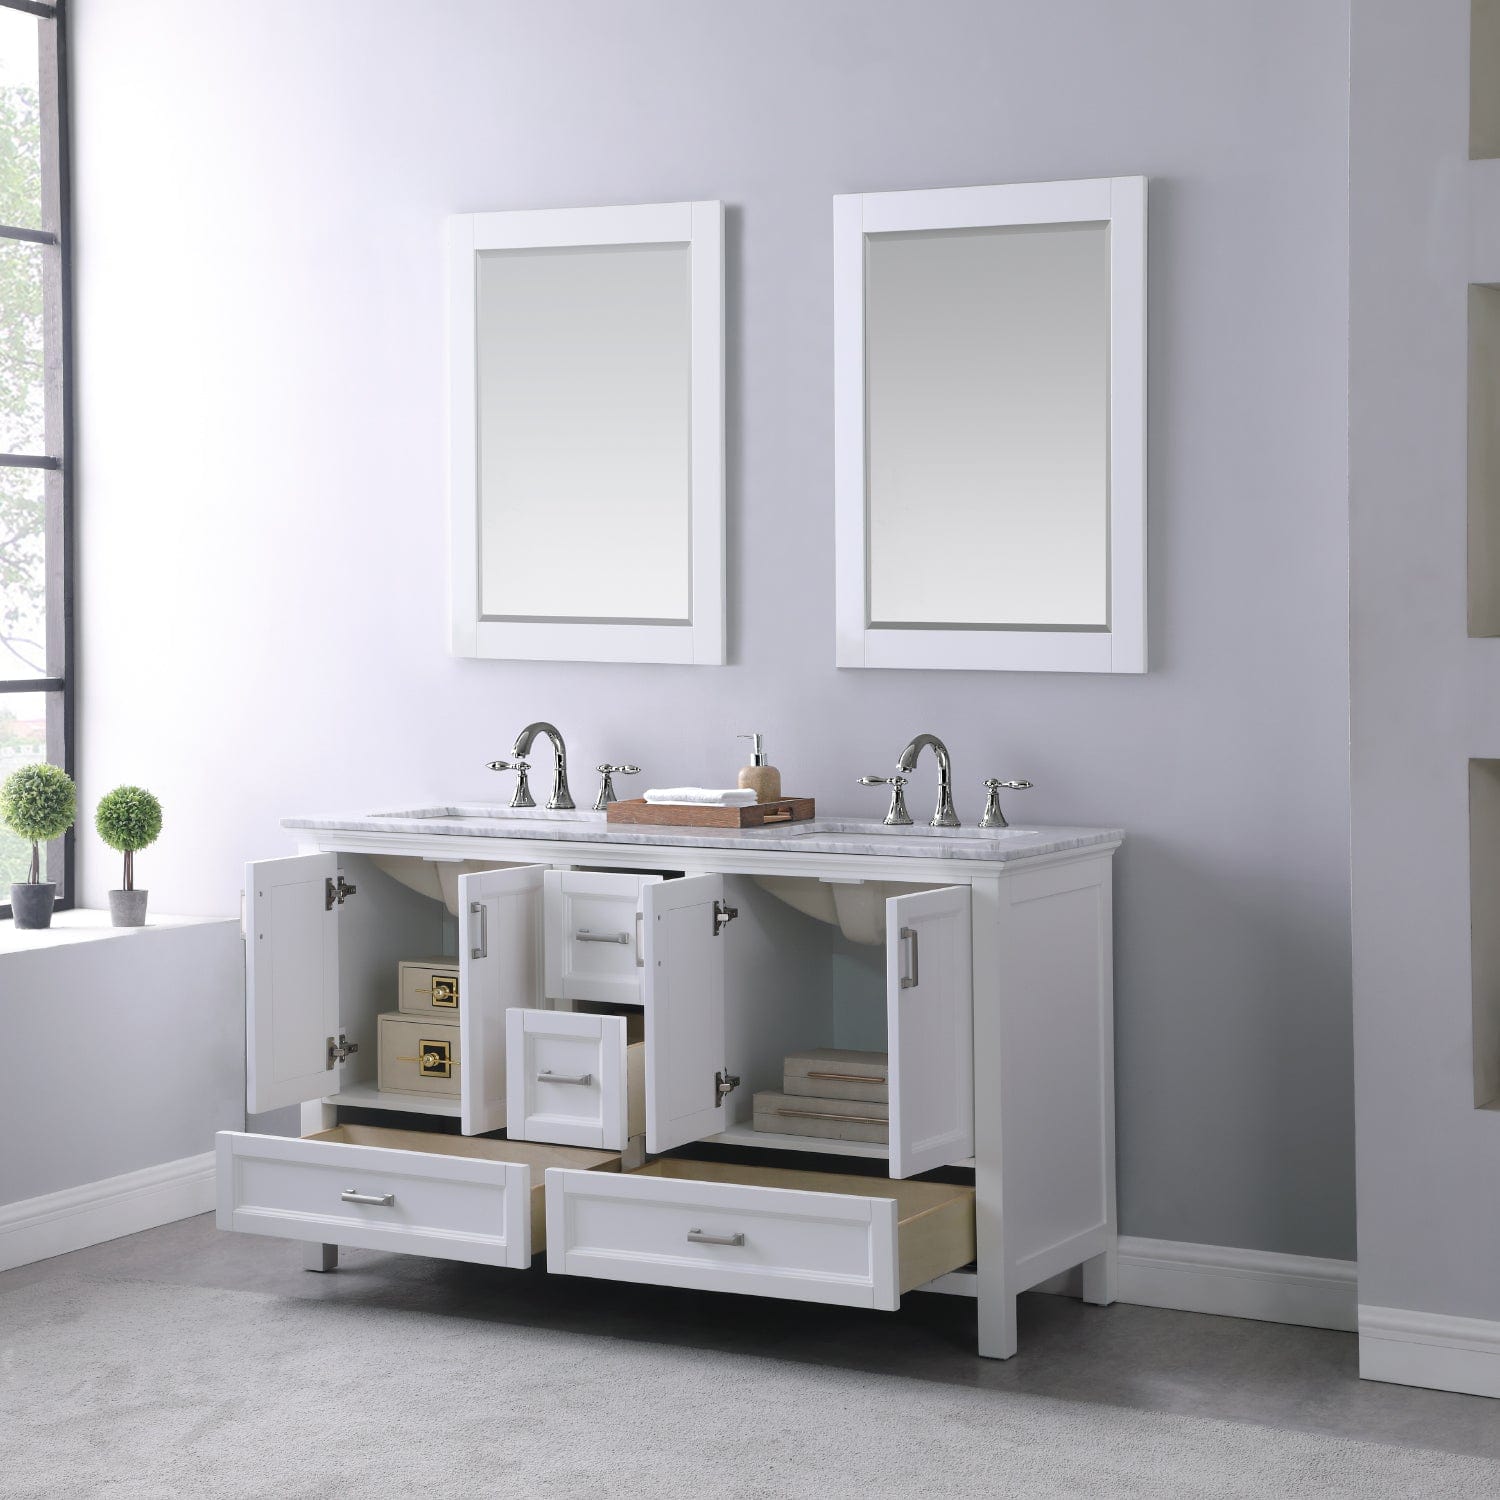 Altair Isla 60" Double Bathroom Vanity Set in White and Carrara White Marble Countertop with Mirror 538060-WH-CA - Molaix631112970938Vanity538060-WH-CA